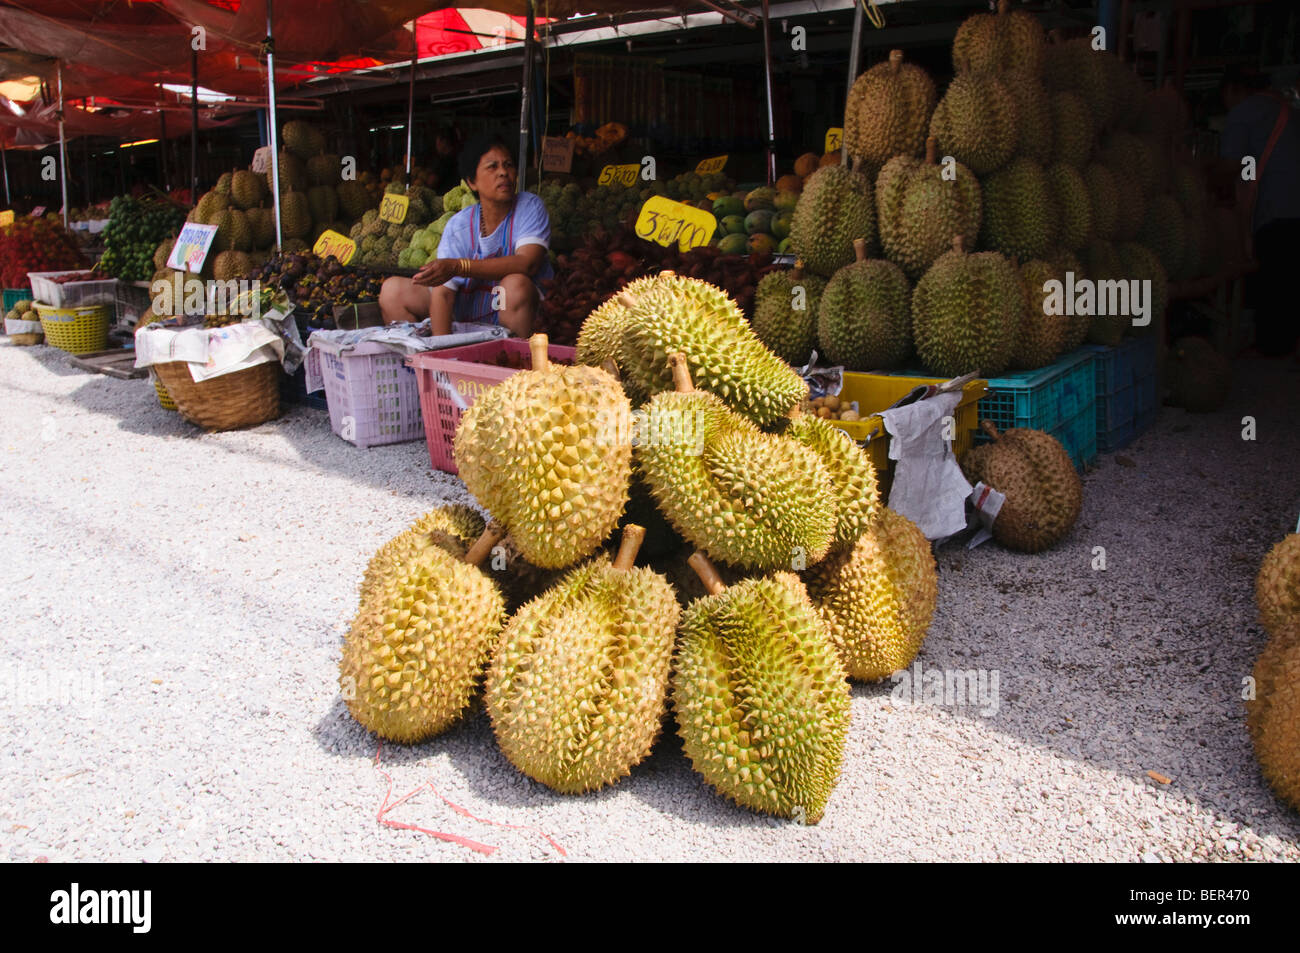 Durian – king of the tropical fruit. Pungent sweet custard like flesh in segmented pods from a hard and spiky fruit Stock Photo